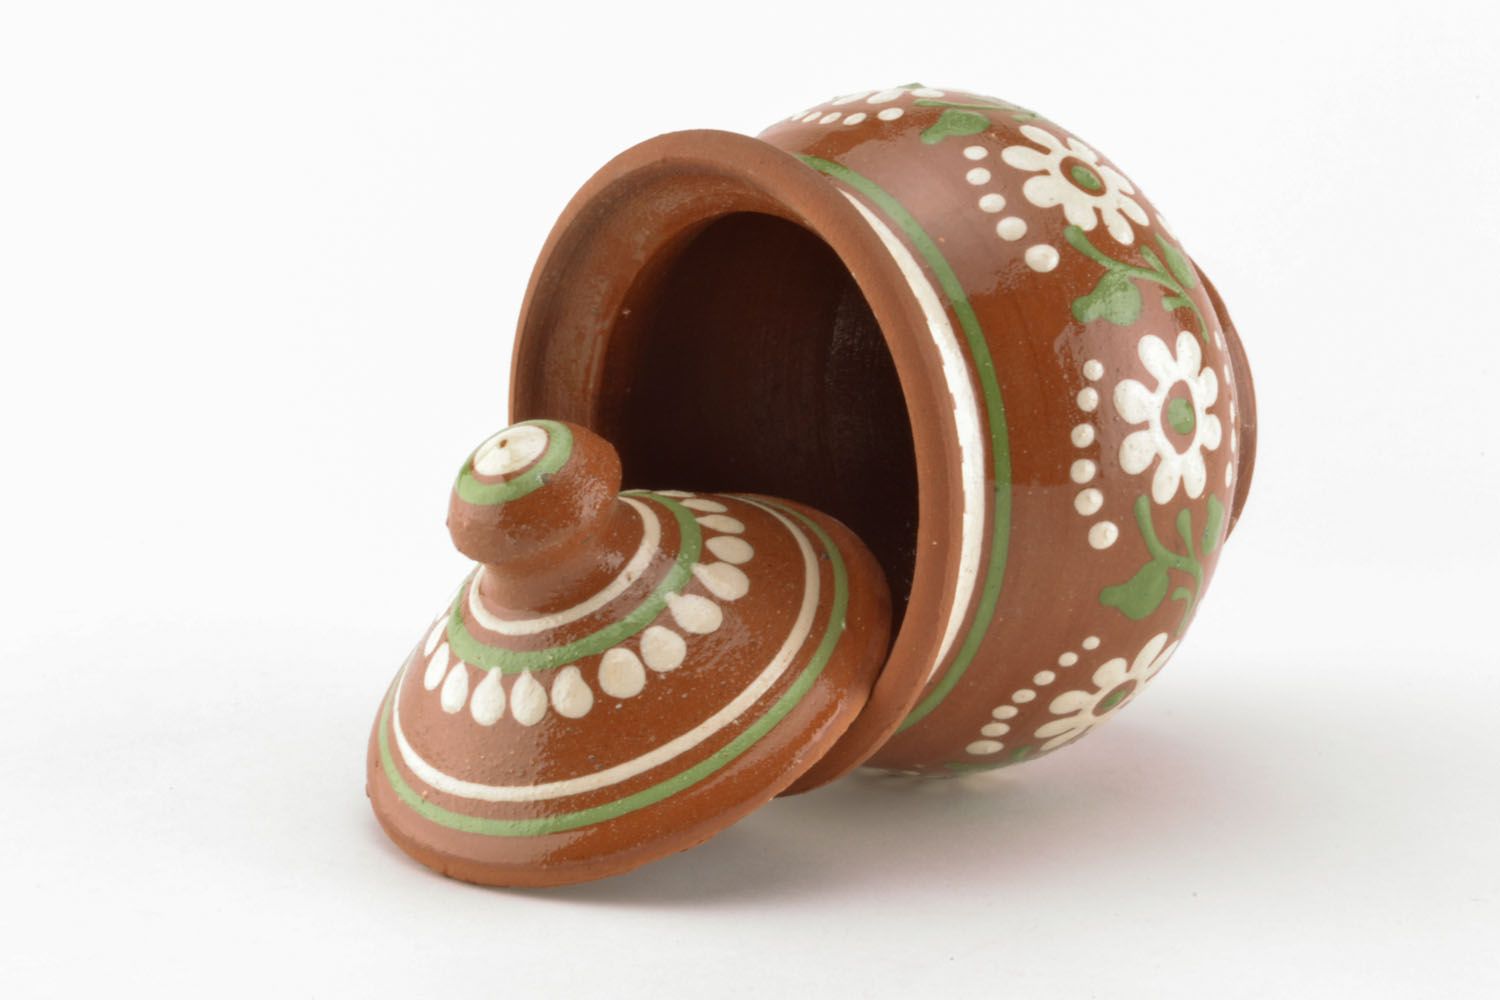 3,5 inches tall cooking ceramic pot with a lid in ethnic style and floral pattern 1 lb photo 3